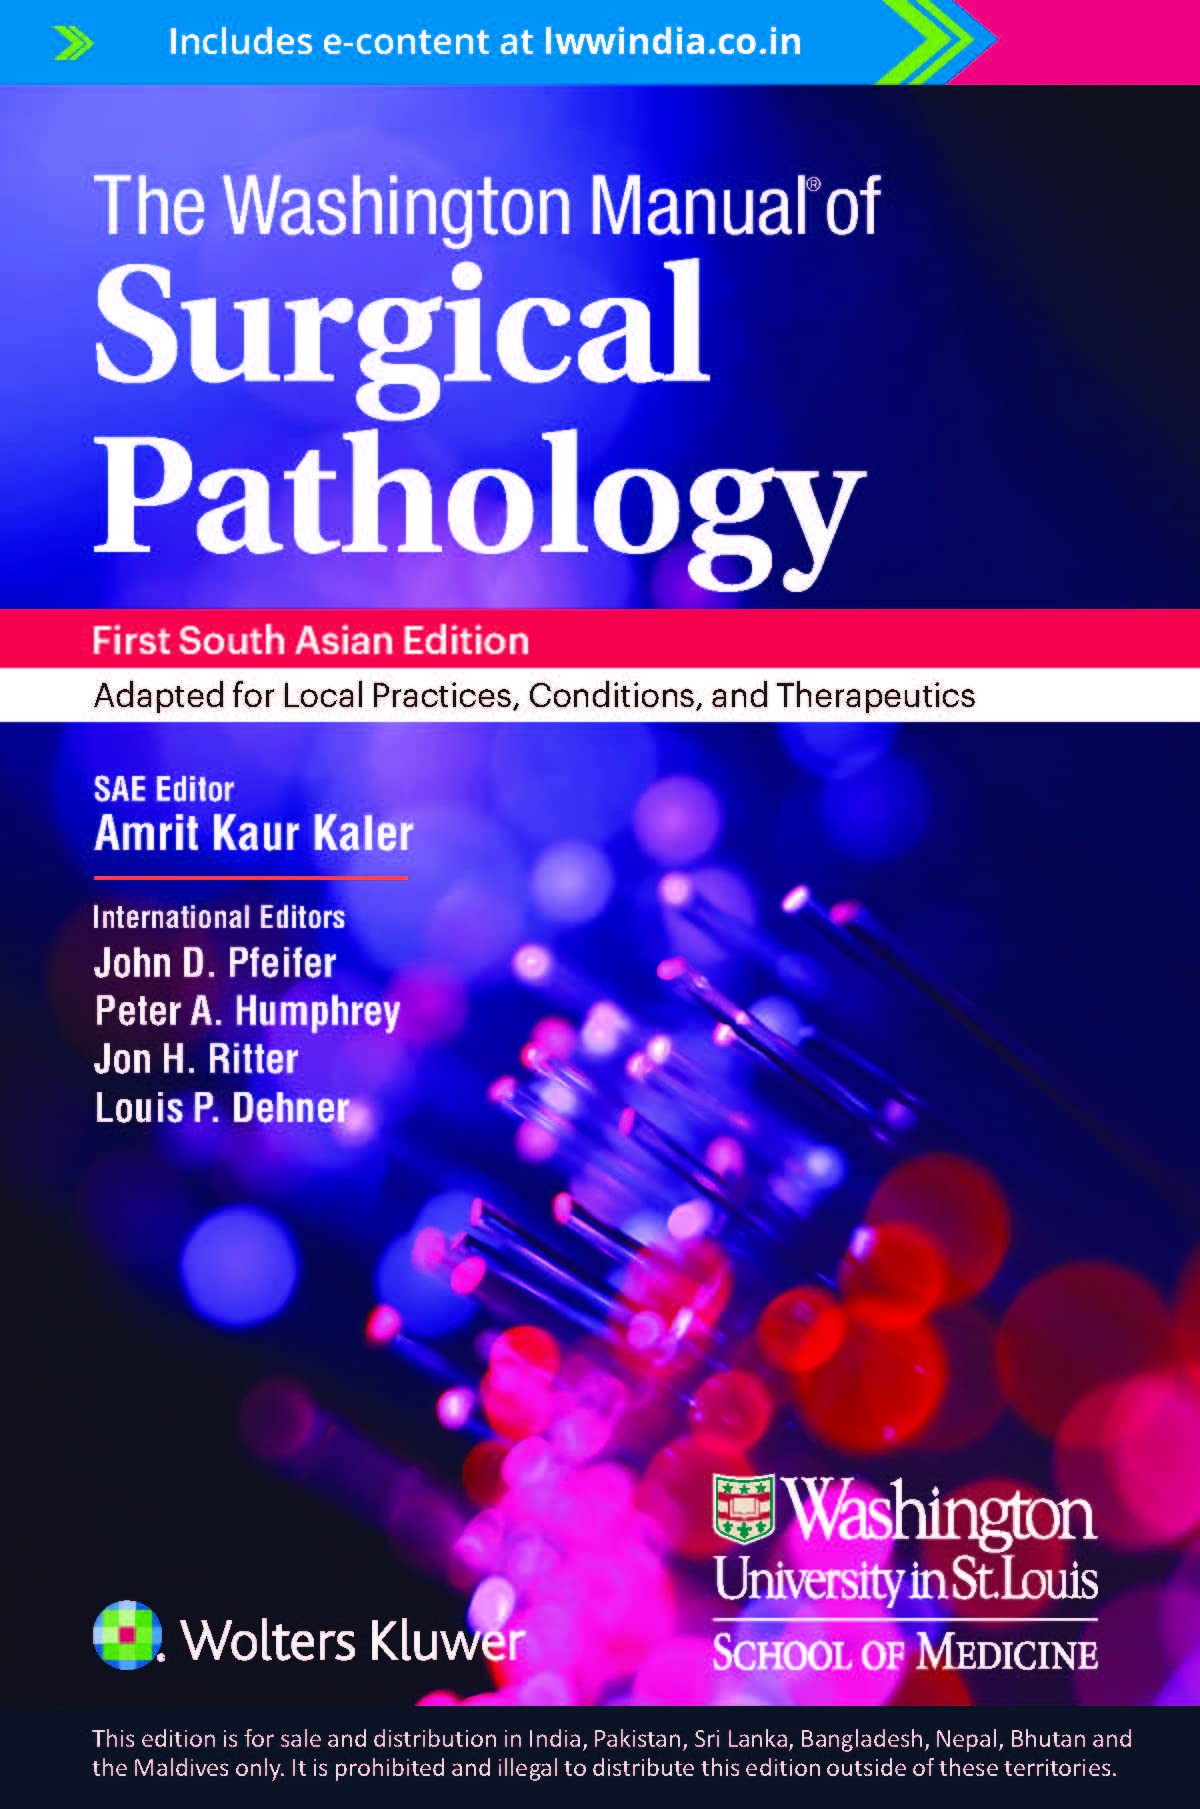 The Washington Manual of Surgical Pathology (First South Asian edition)